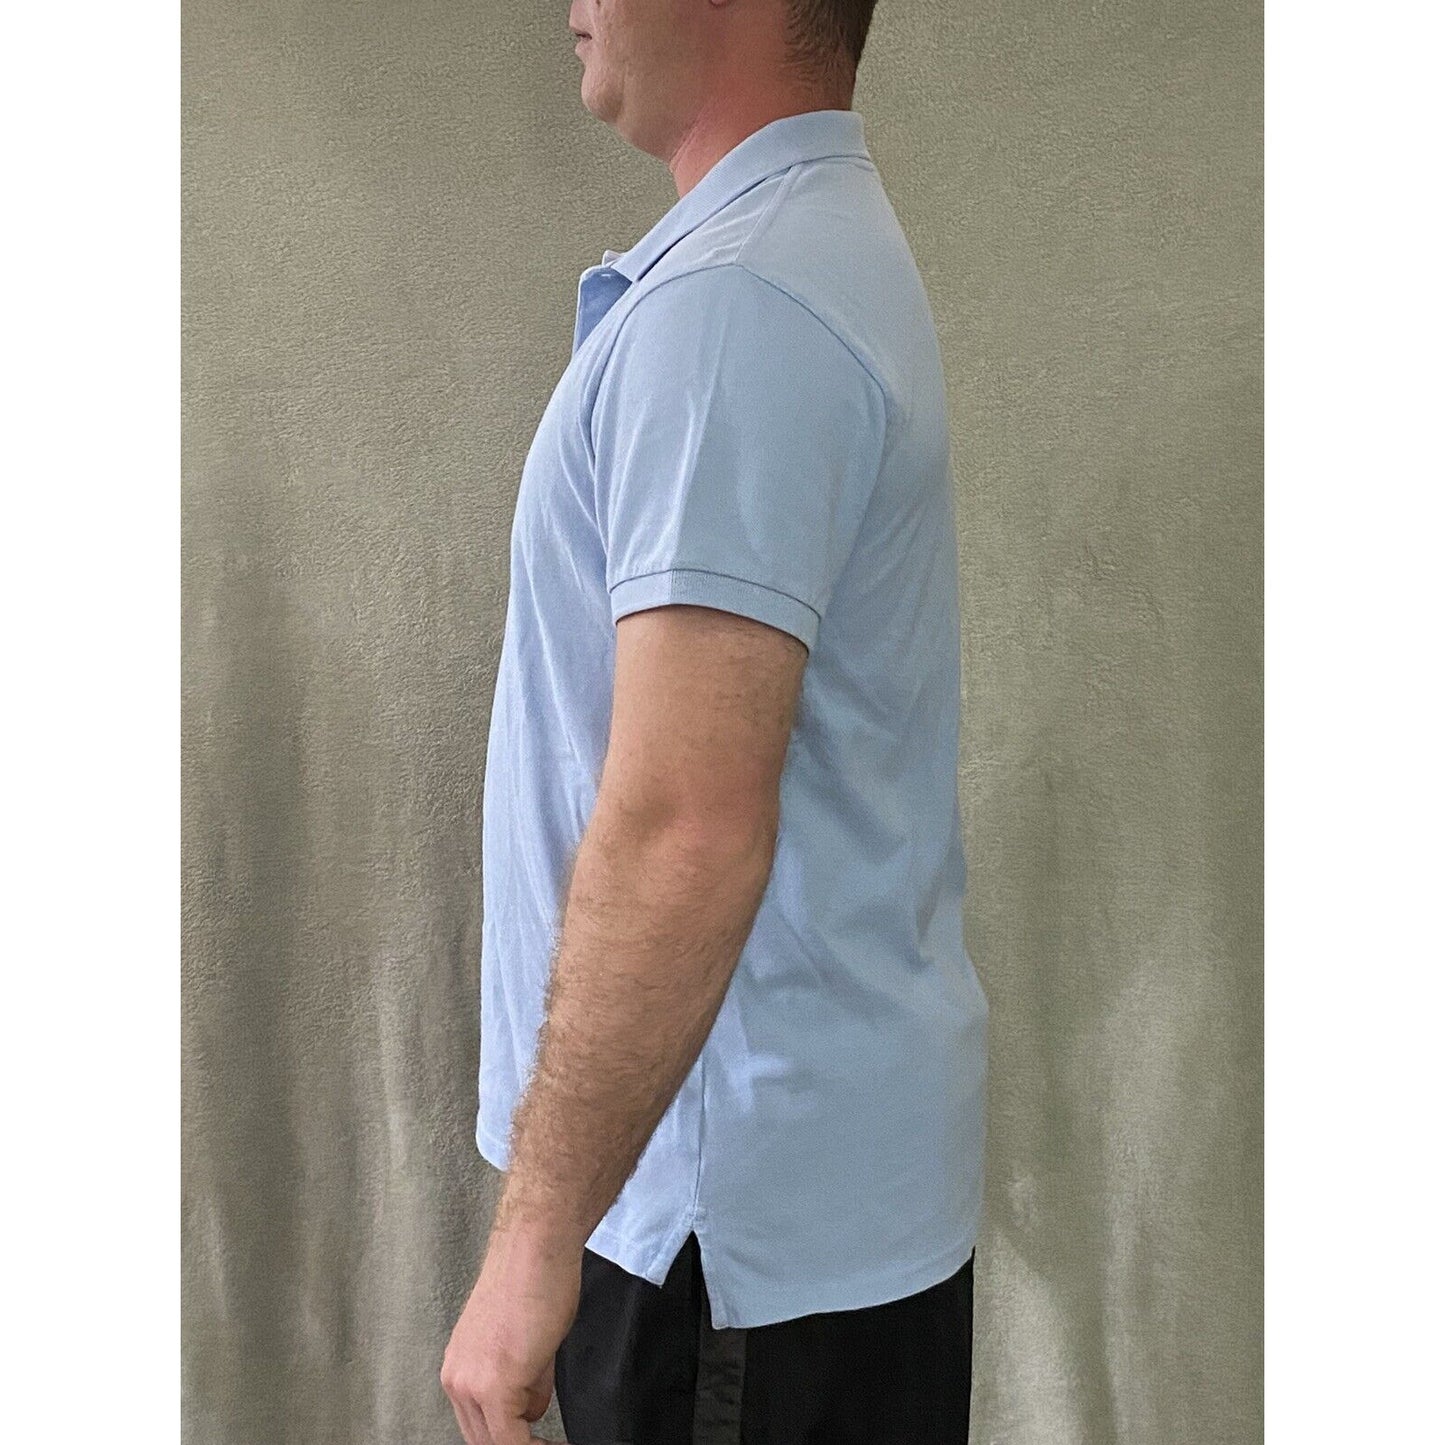 Banana Republic Light Blue Periwinkle Men’s Large Fitted Cotton Polo Shirt